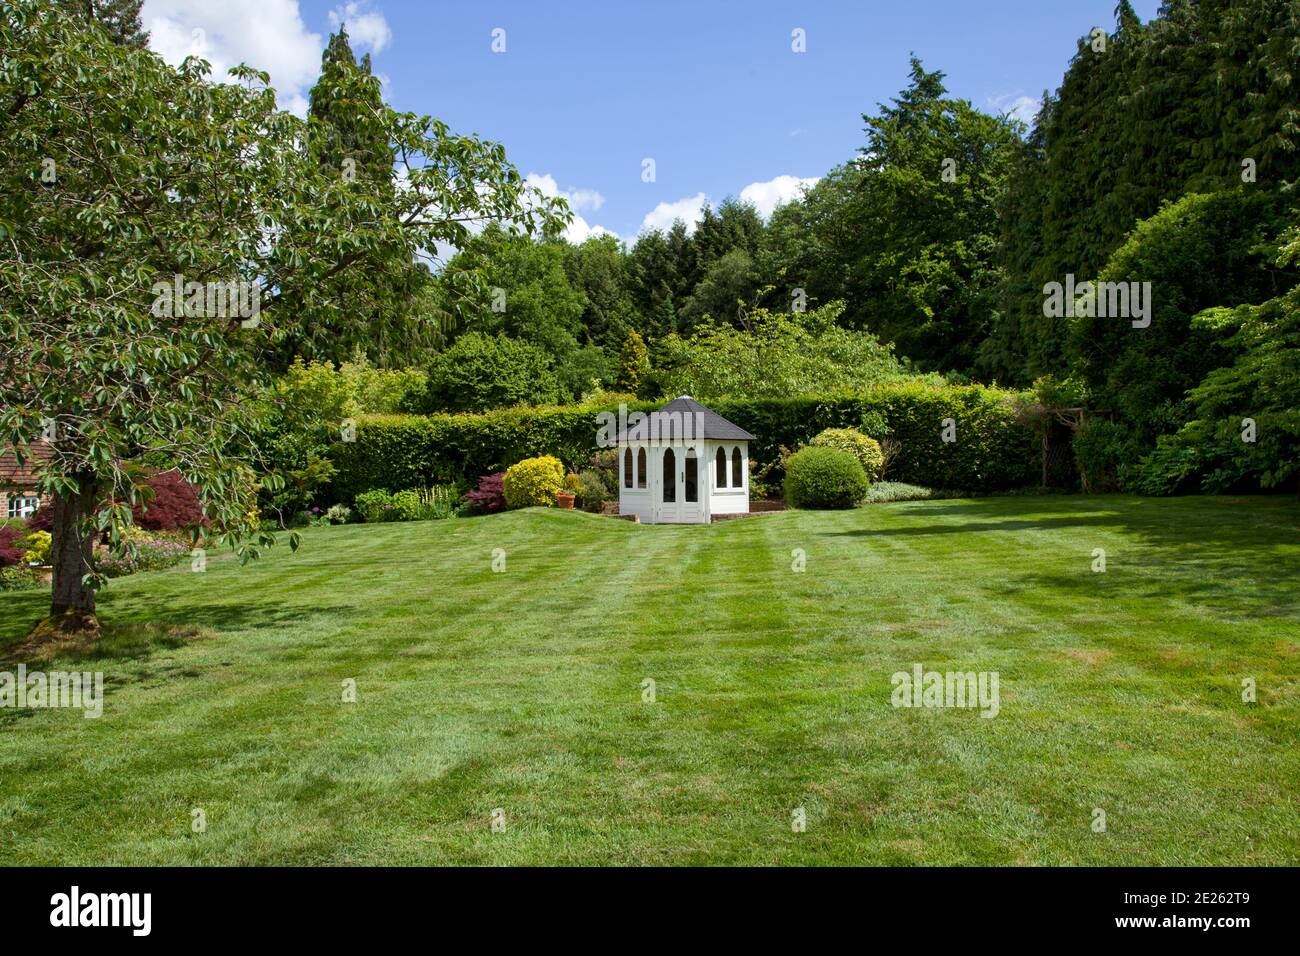 Octagonal white summer house across lawn surrounded by trees Stock Photo